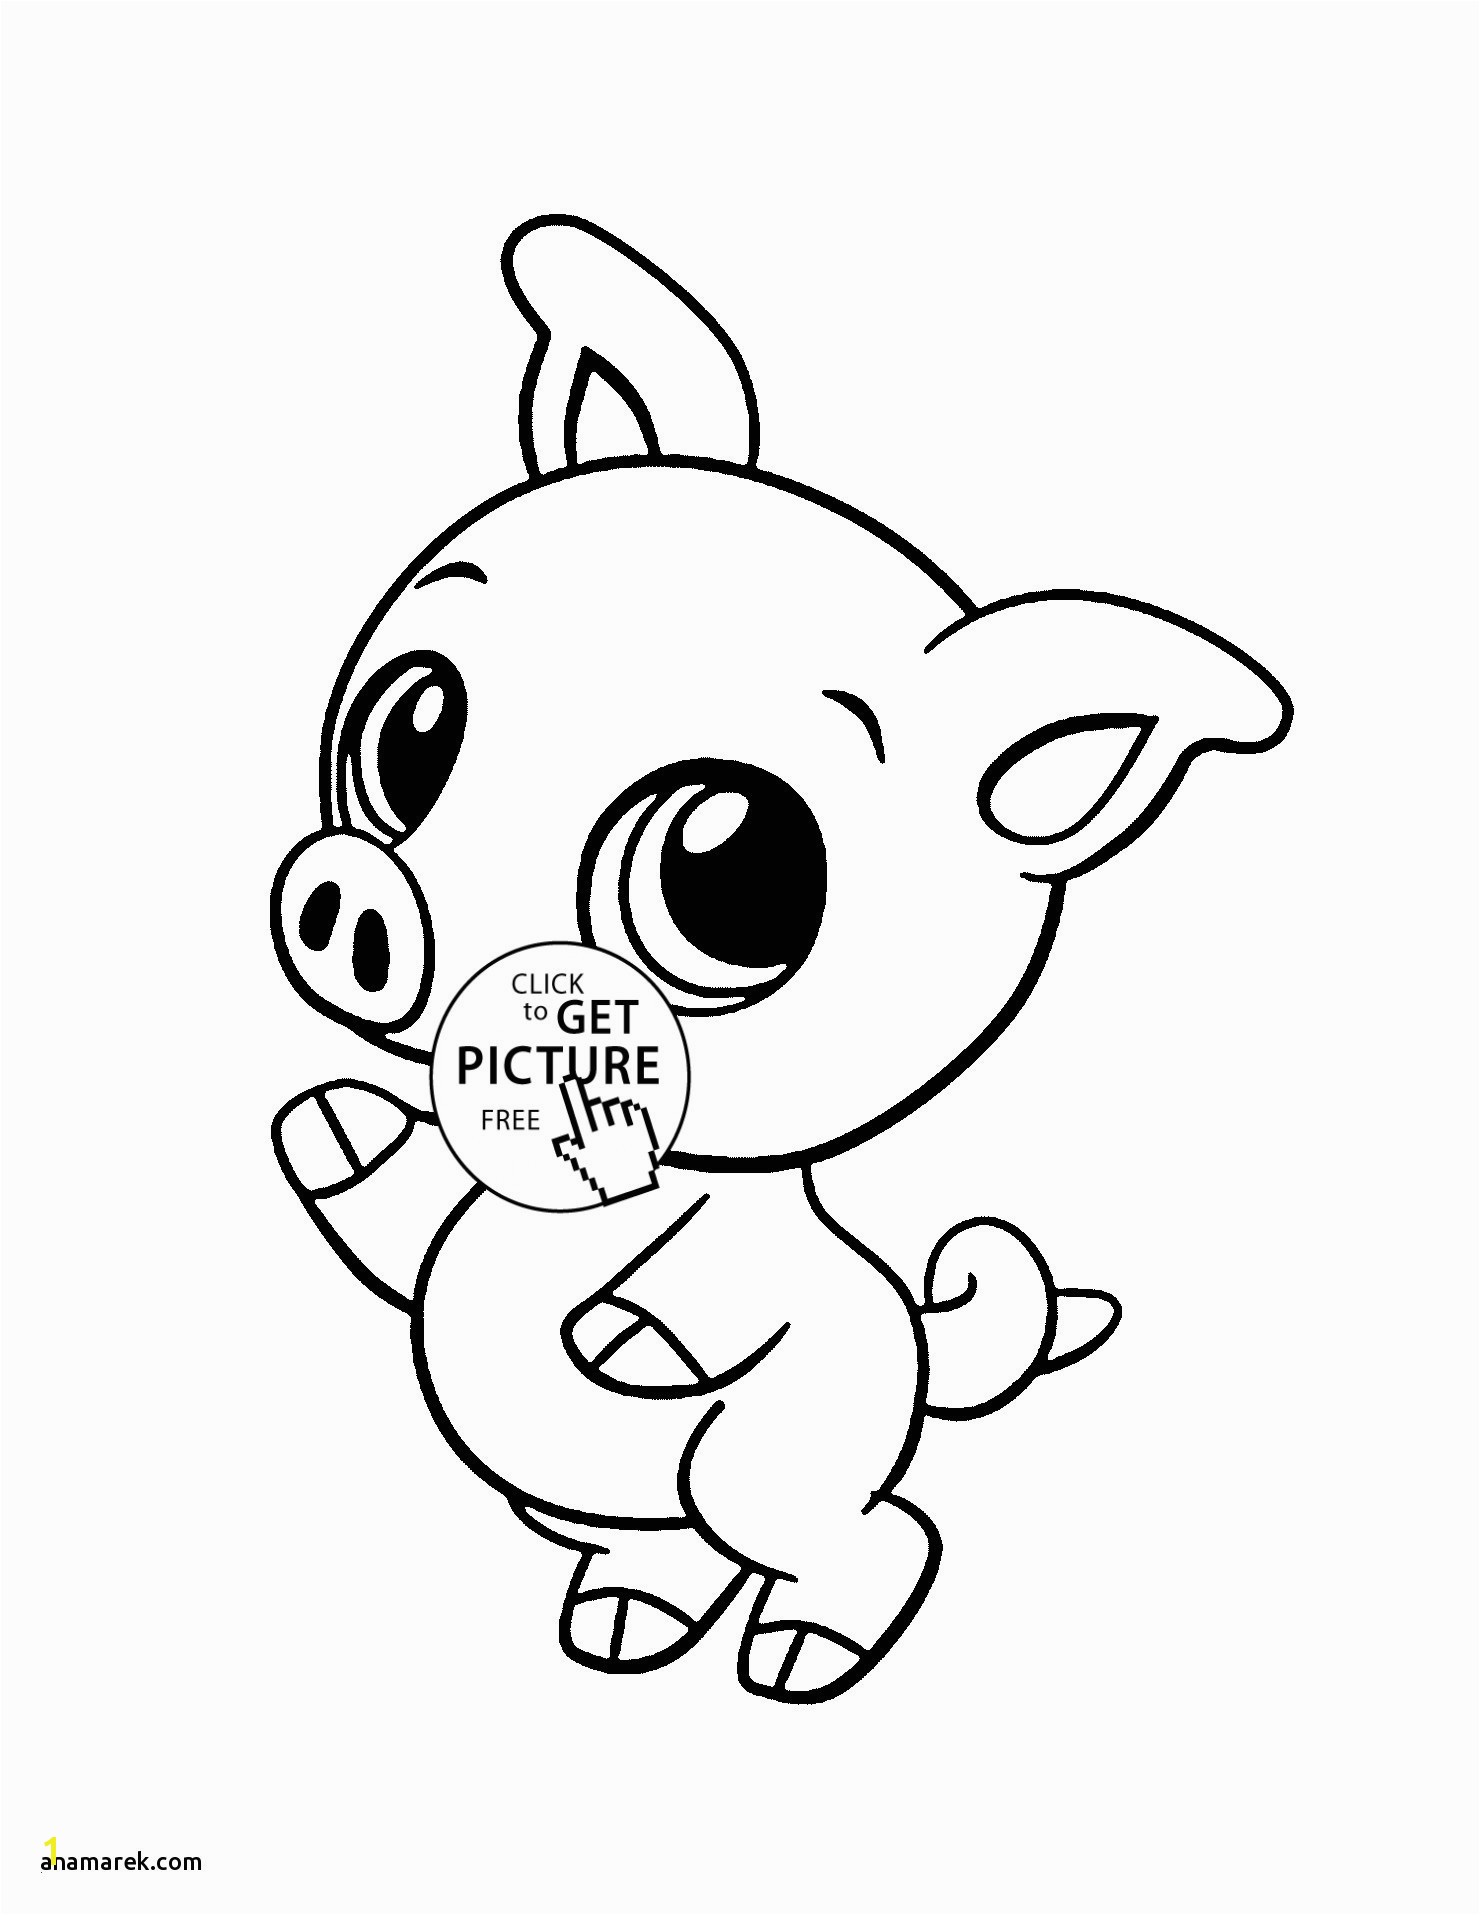 Baby Animal Coloring Pages 34 Elegant Baby Animals Coloring Pages Alabamashrimpfestival